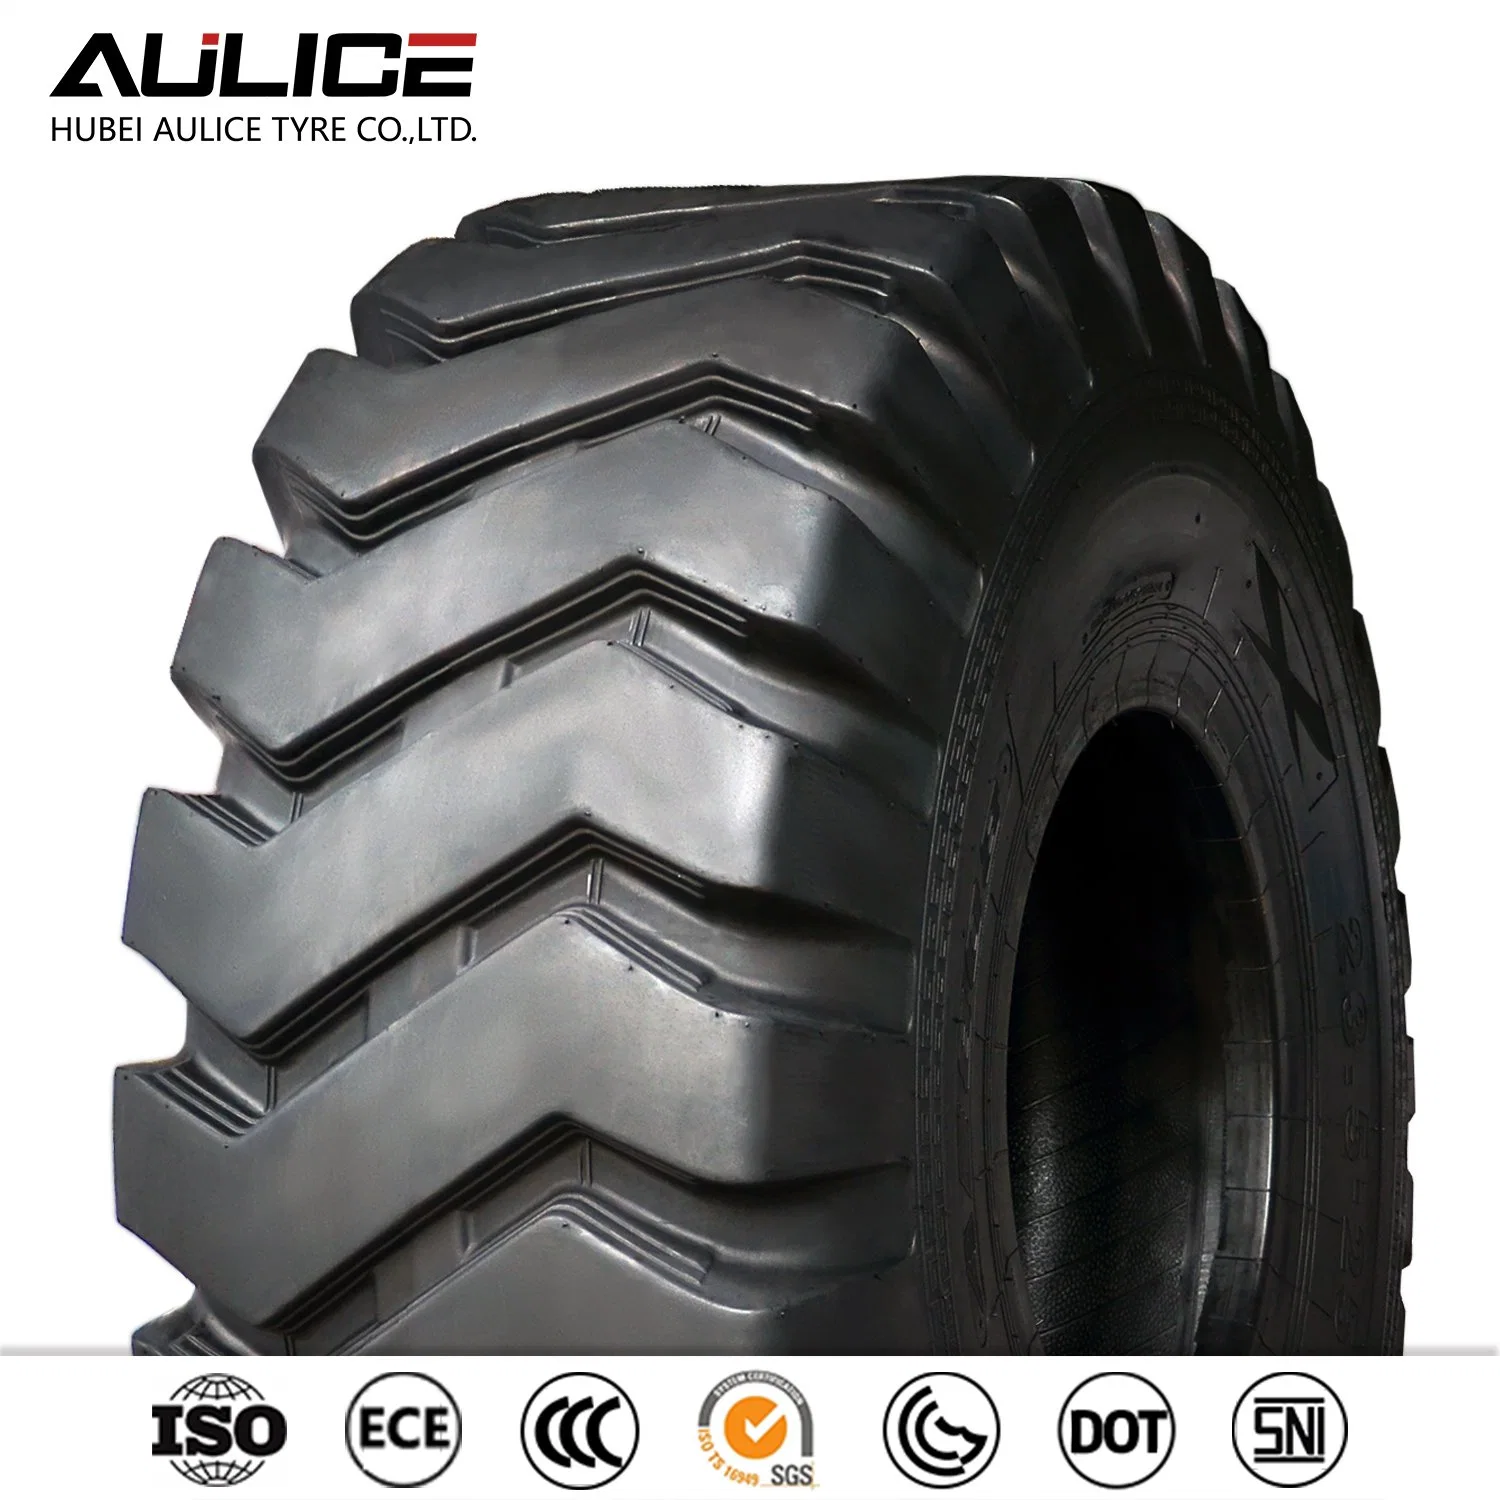 OTR Tyre / Off- Road Tyre (E-3/L-3 17.5-25) with New Transverse Pattern from Factory Wholesale